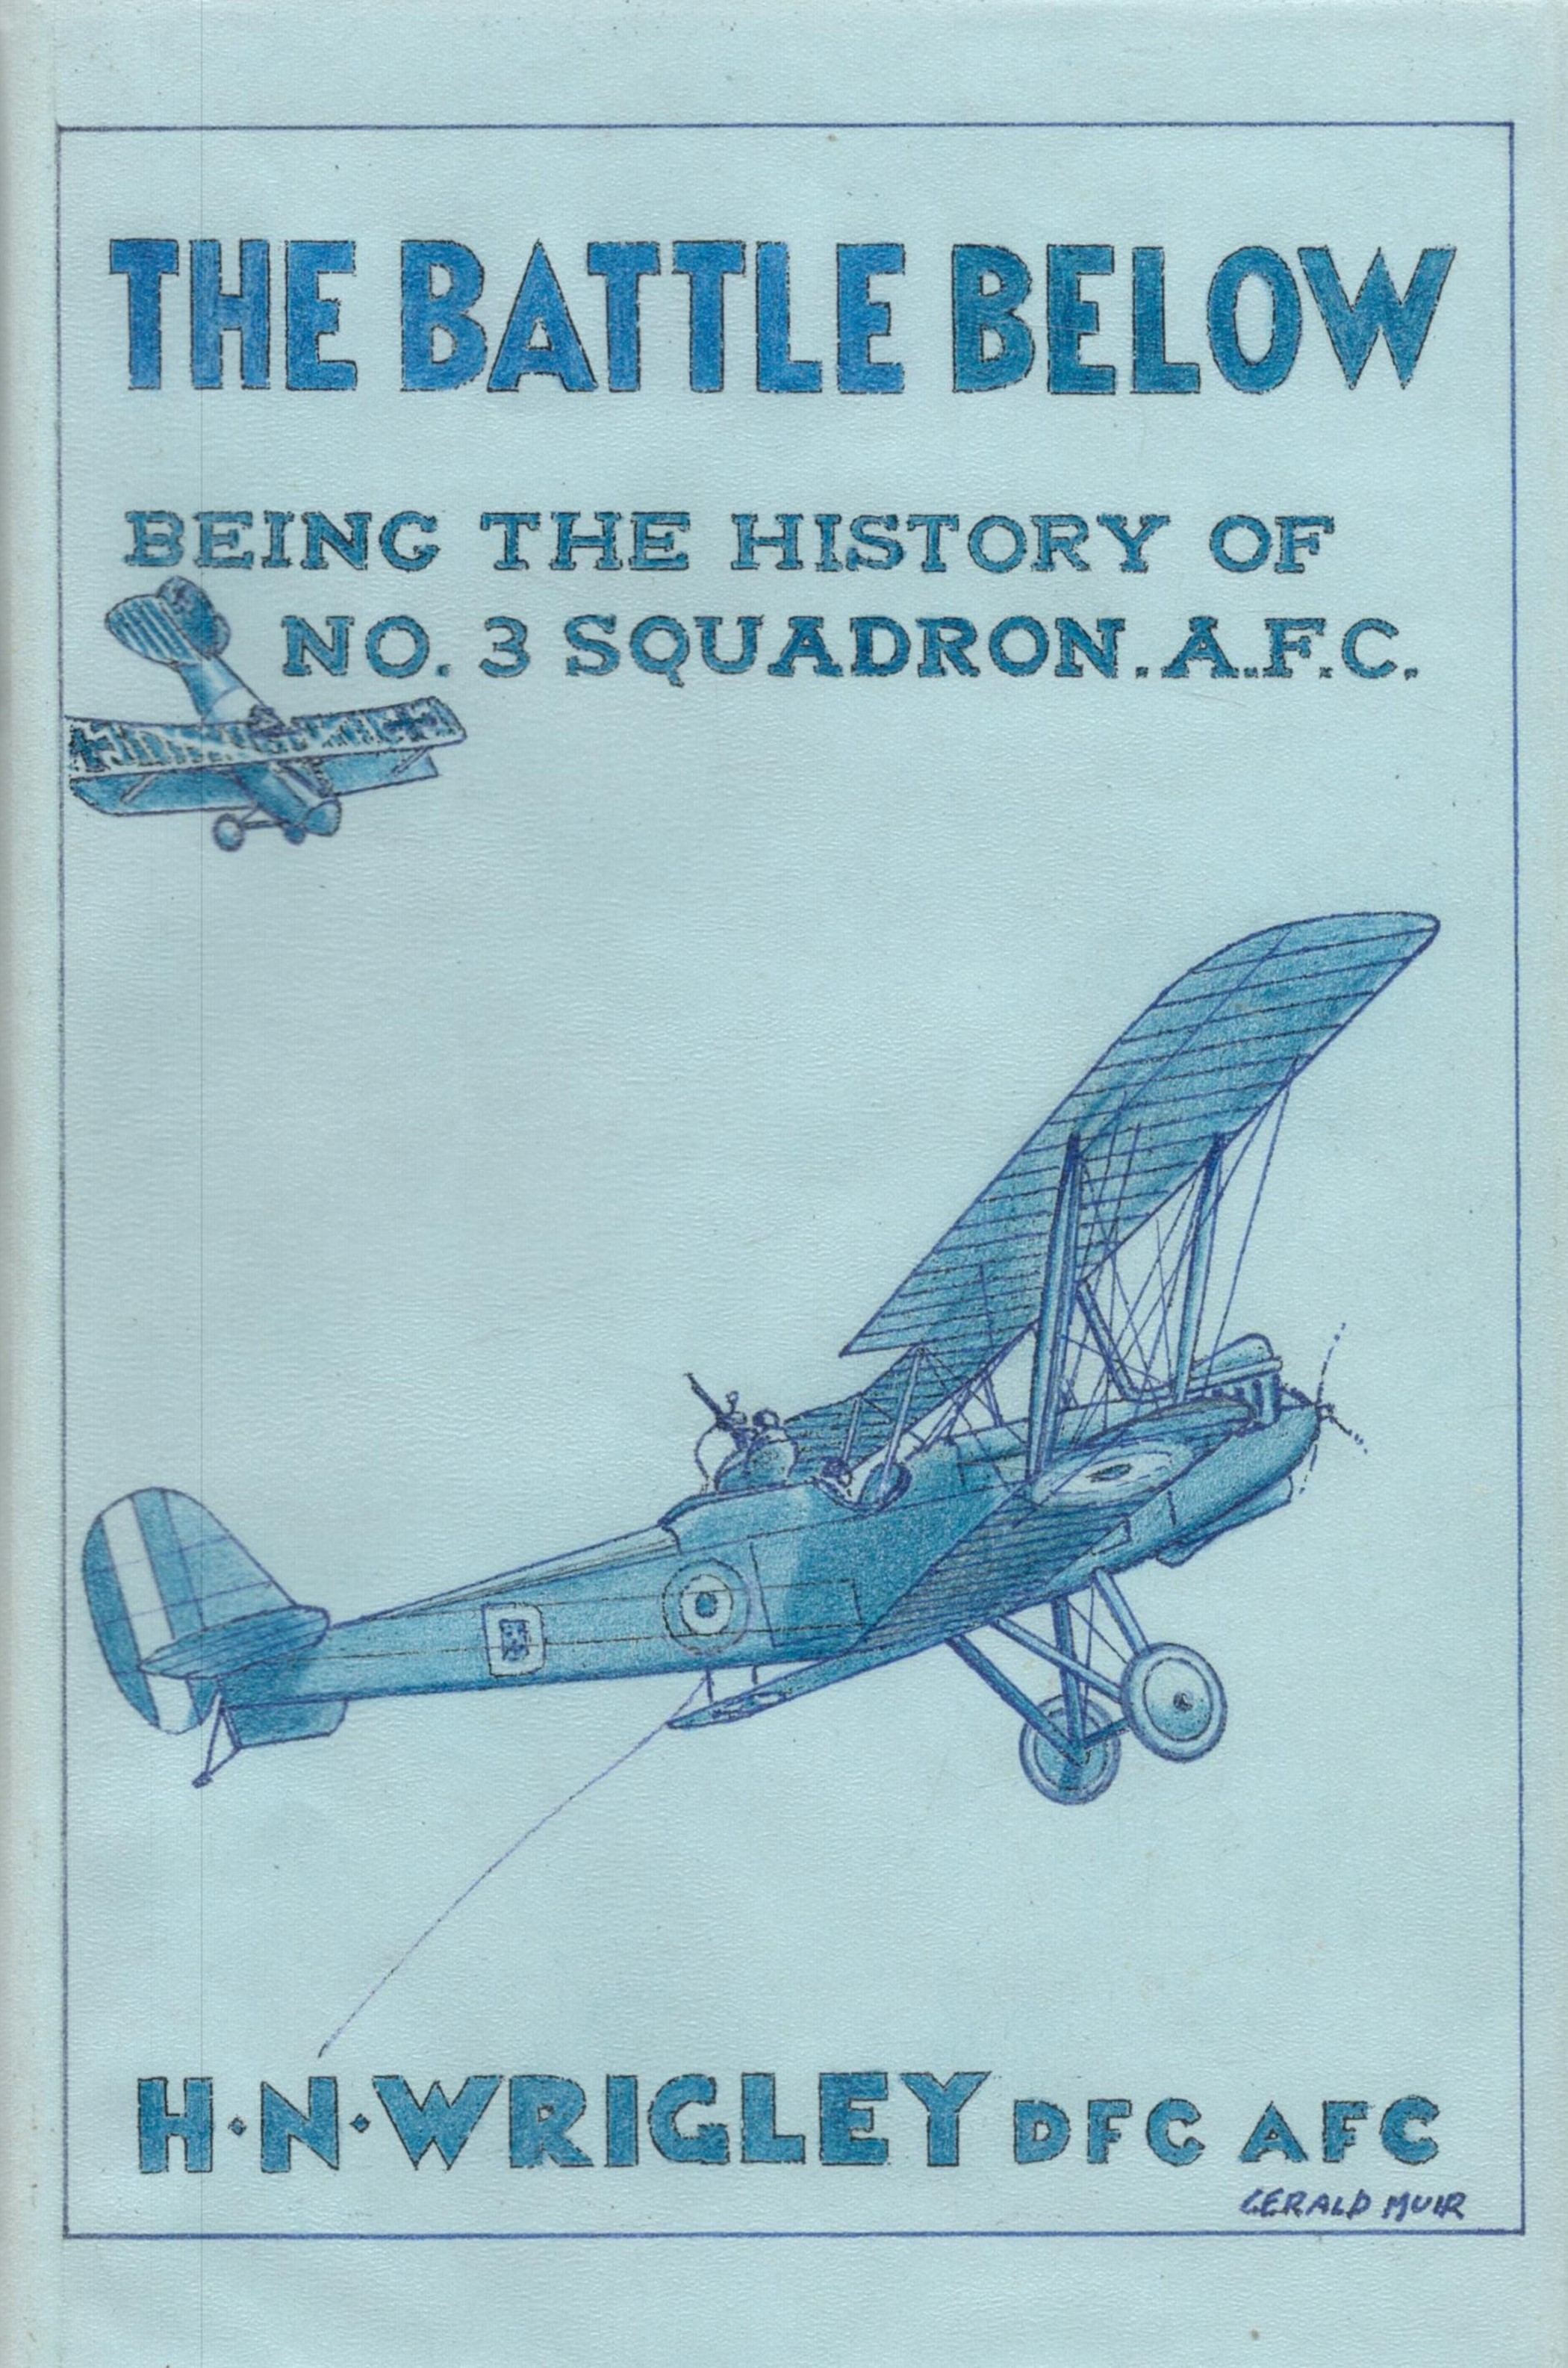 Wing Commander H N Wrigley DFC AFC Signed Book The Battle Below Being the History of No 3 Squadron